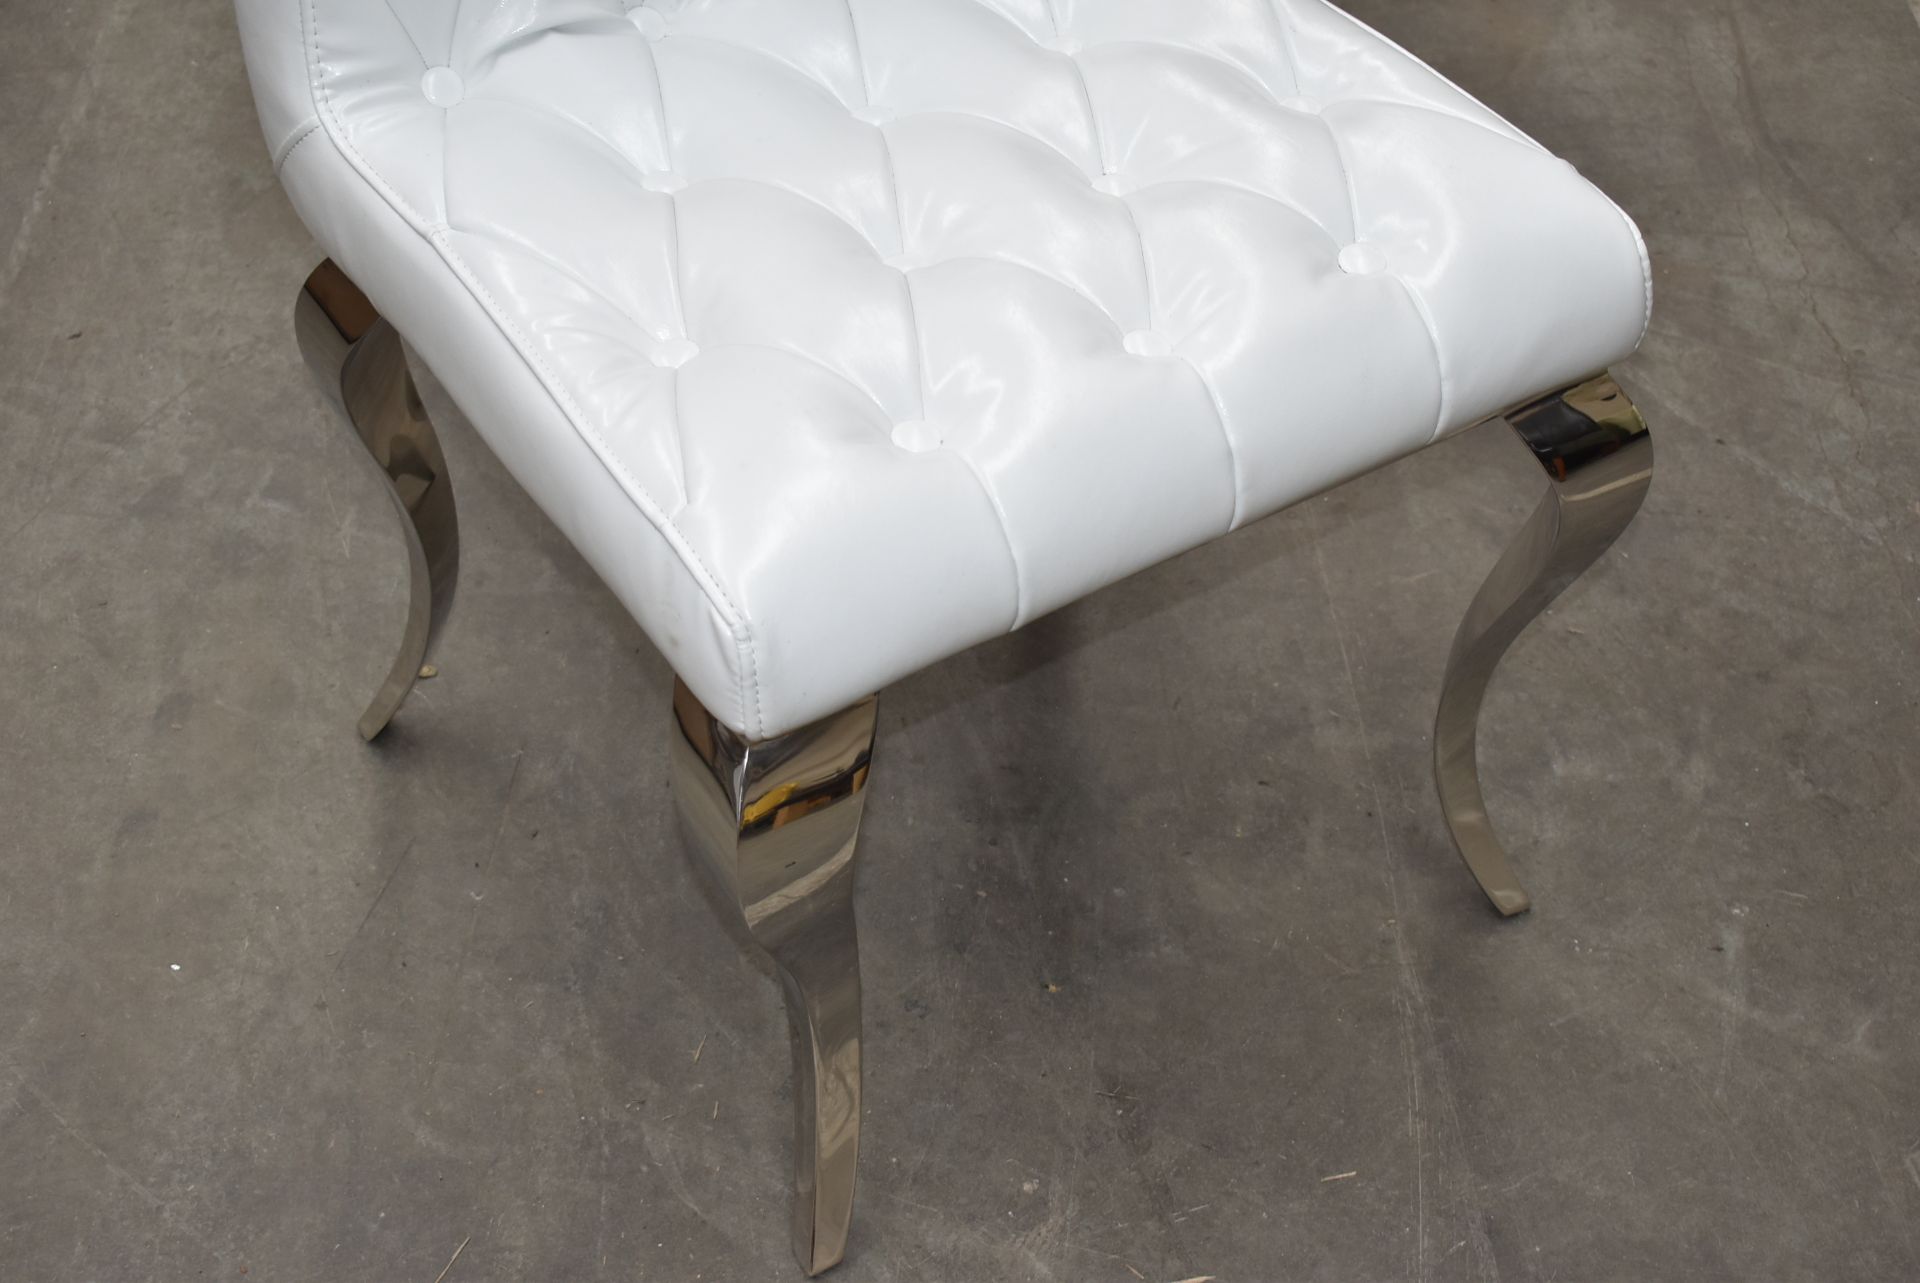 1 x Elegant White Leather Studded Bedroom Chair With Scroll Back and Chrome Legs - CL999 - Ref - Image 6 of 6